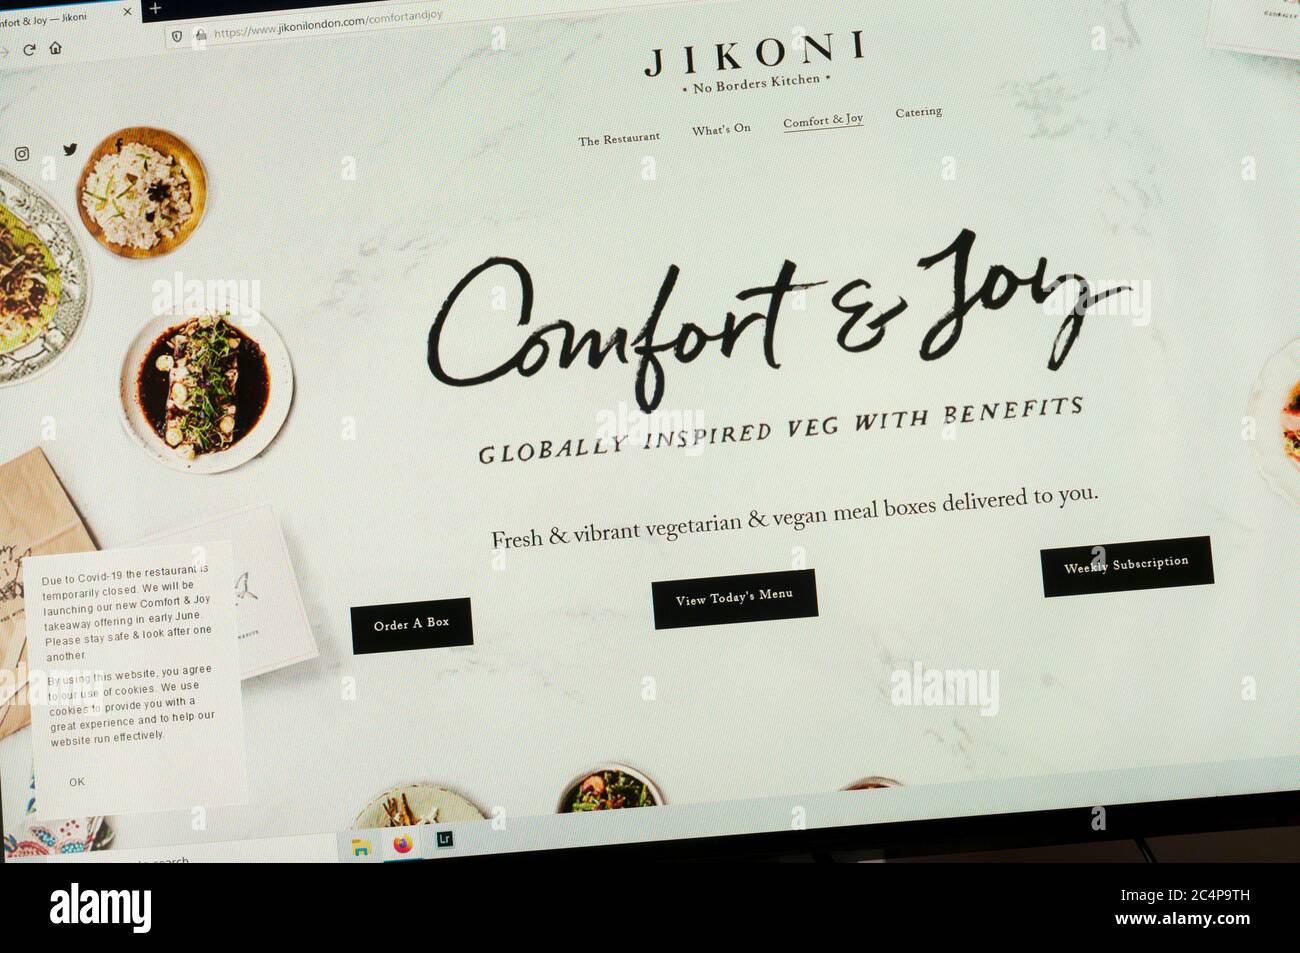 Homepage of the website for Comfort & Joy the takeaway service of Jikoni restaurant in London. Stock Photo